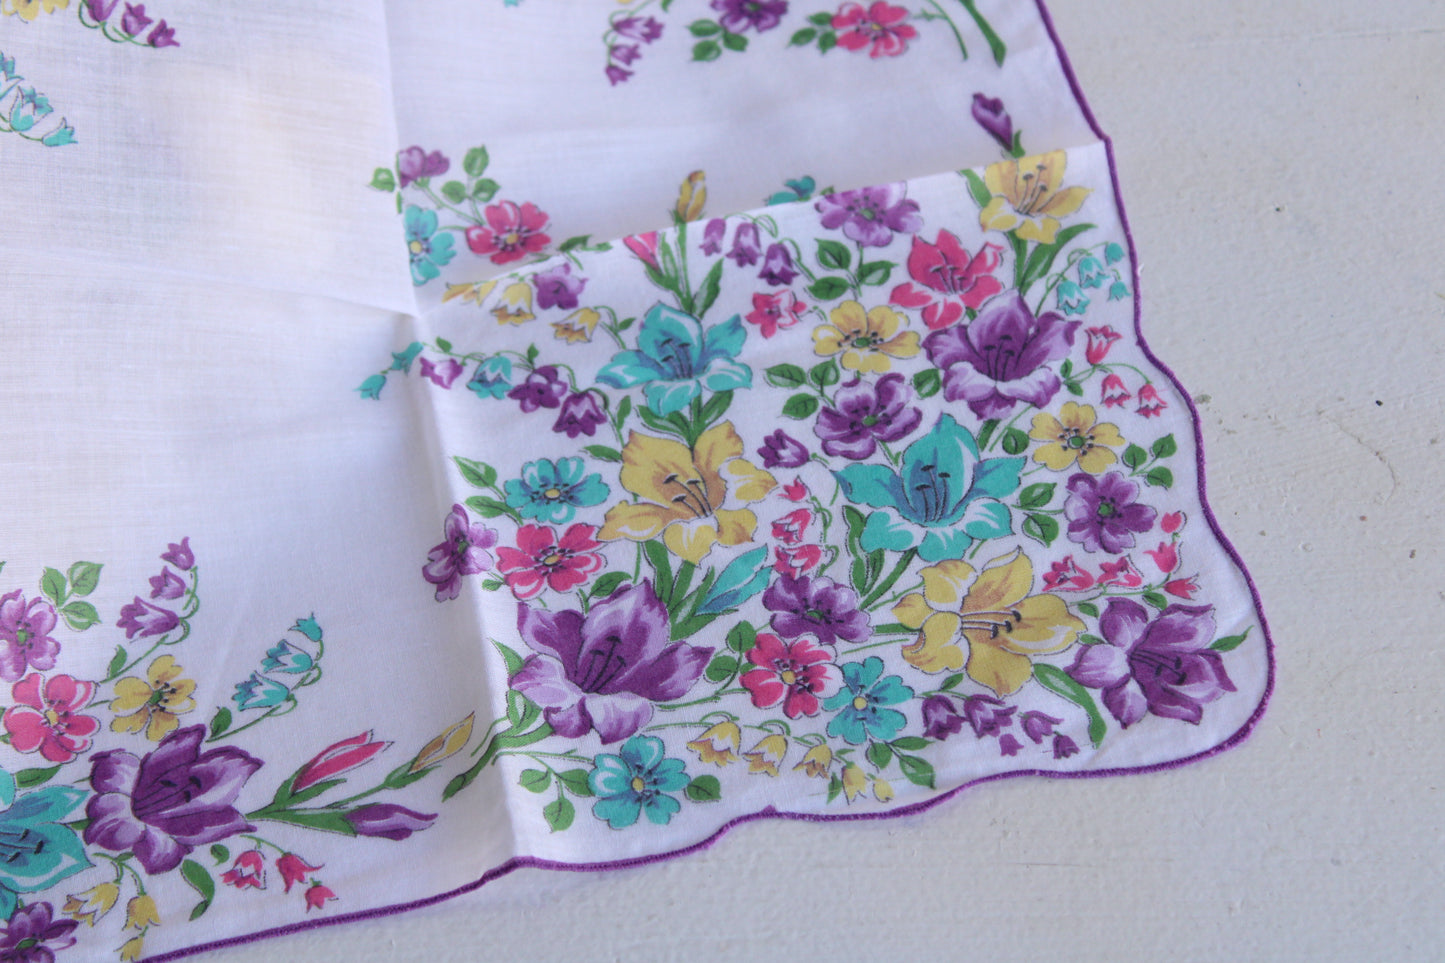 Vintage Cotton Hanky with Purple and Teal Flowers